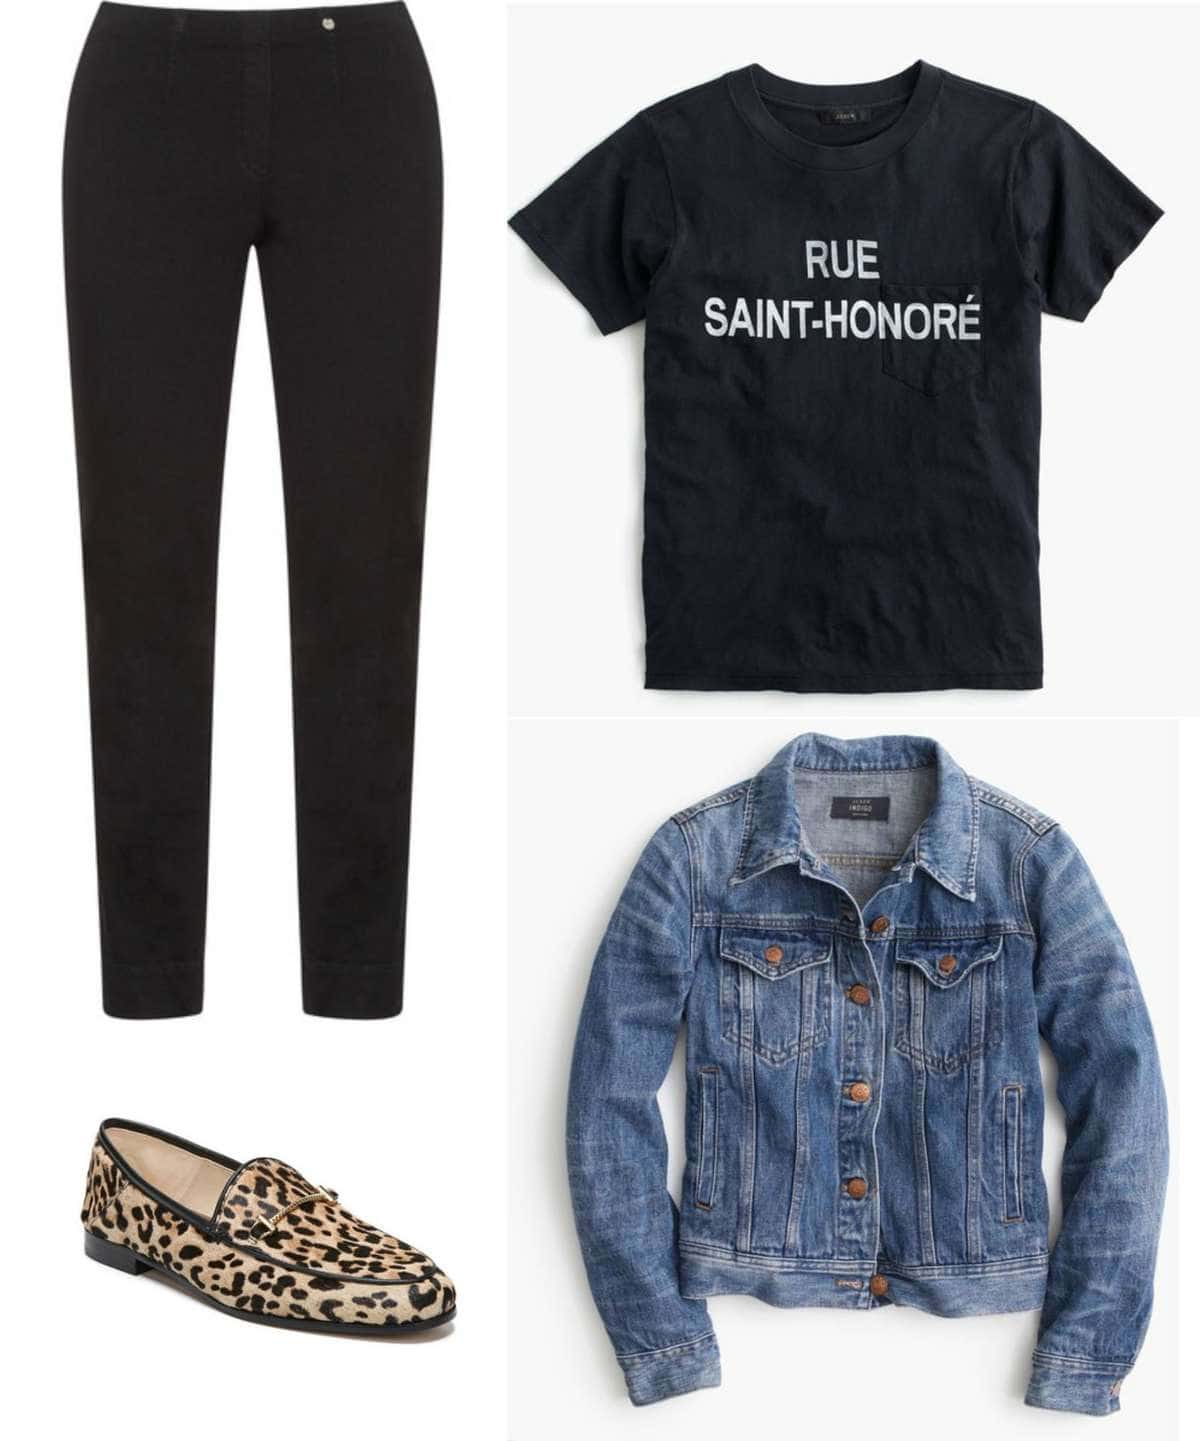 Slogan tees are hot this year, and can look polished when styled with black ankle pants and a dressier shoe.